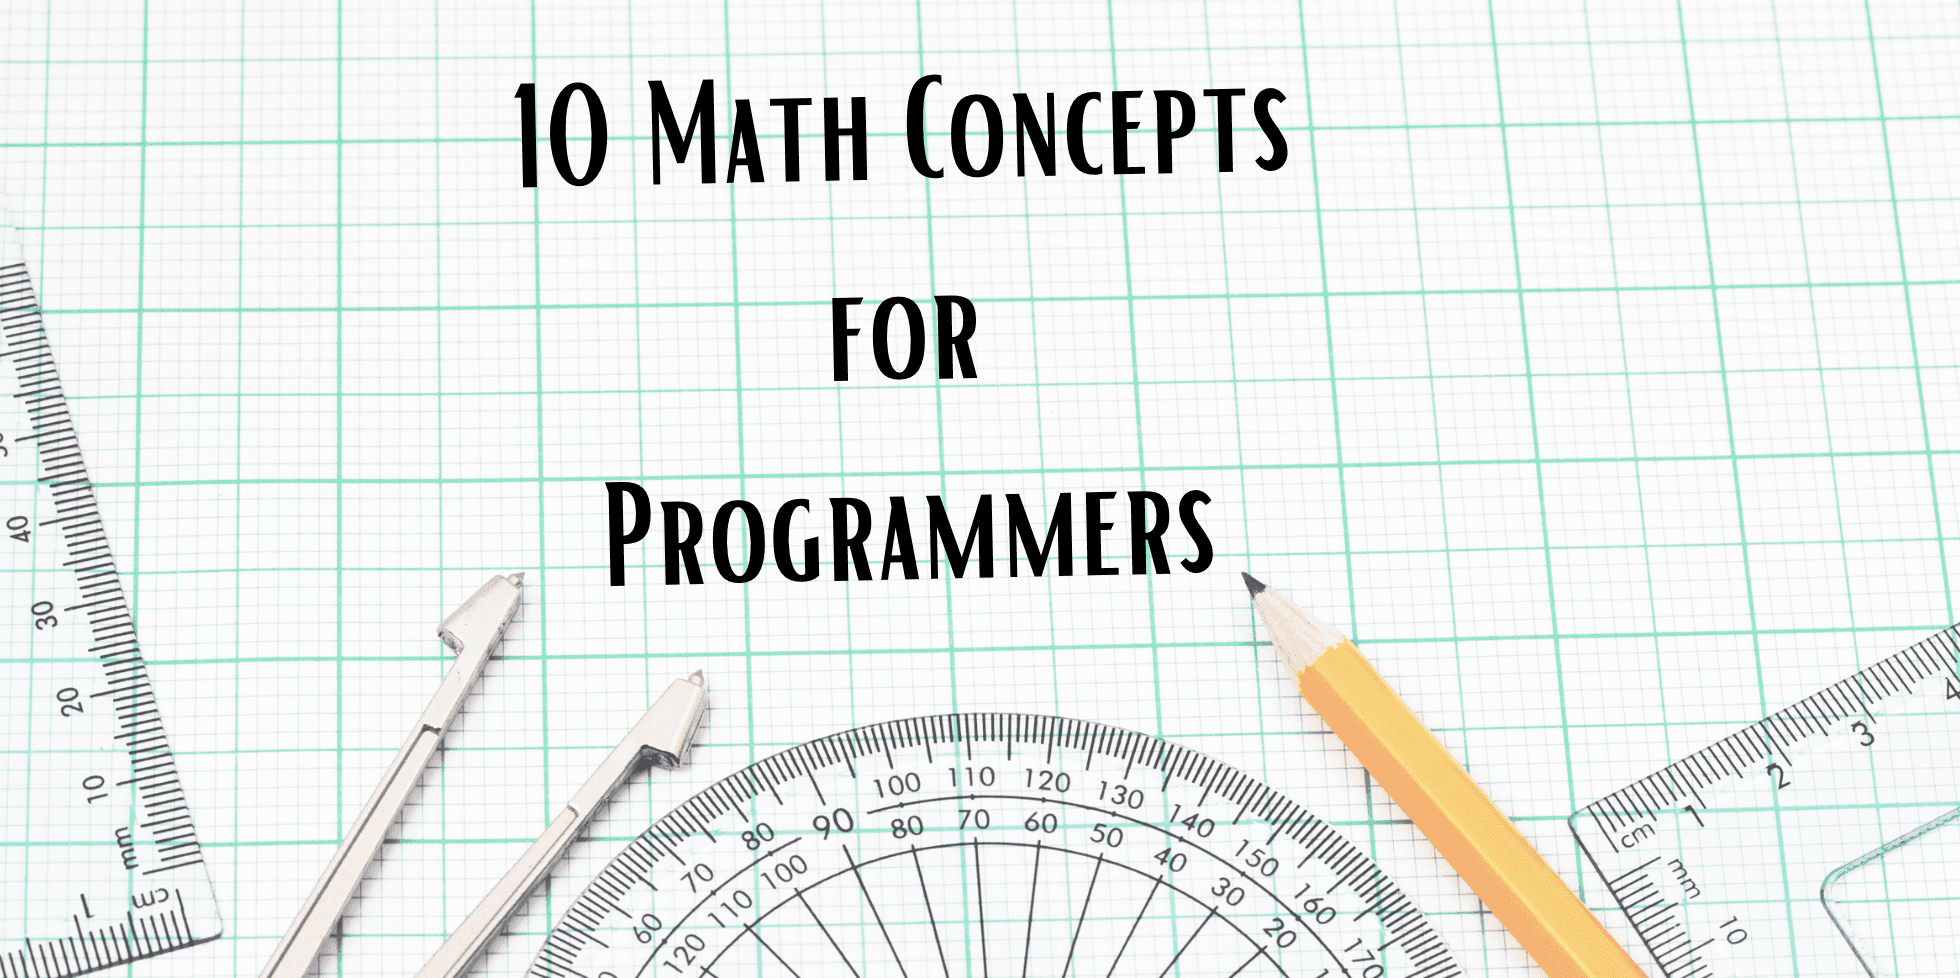 10 Math Concepts for Programmers